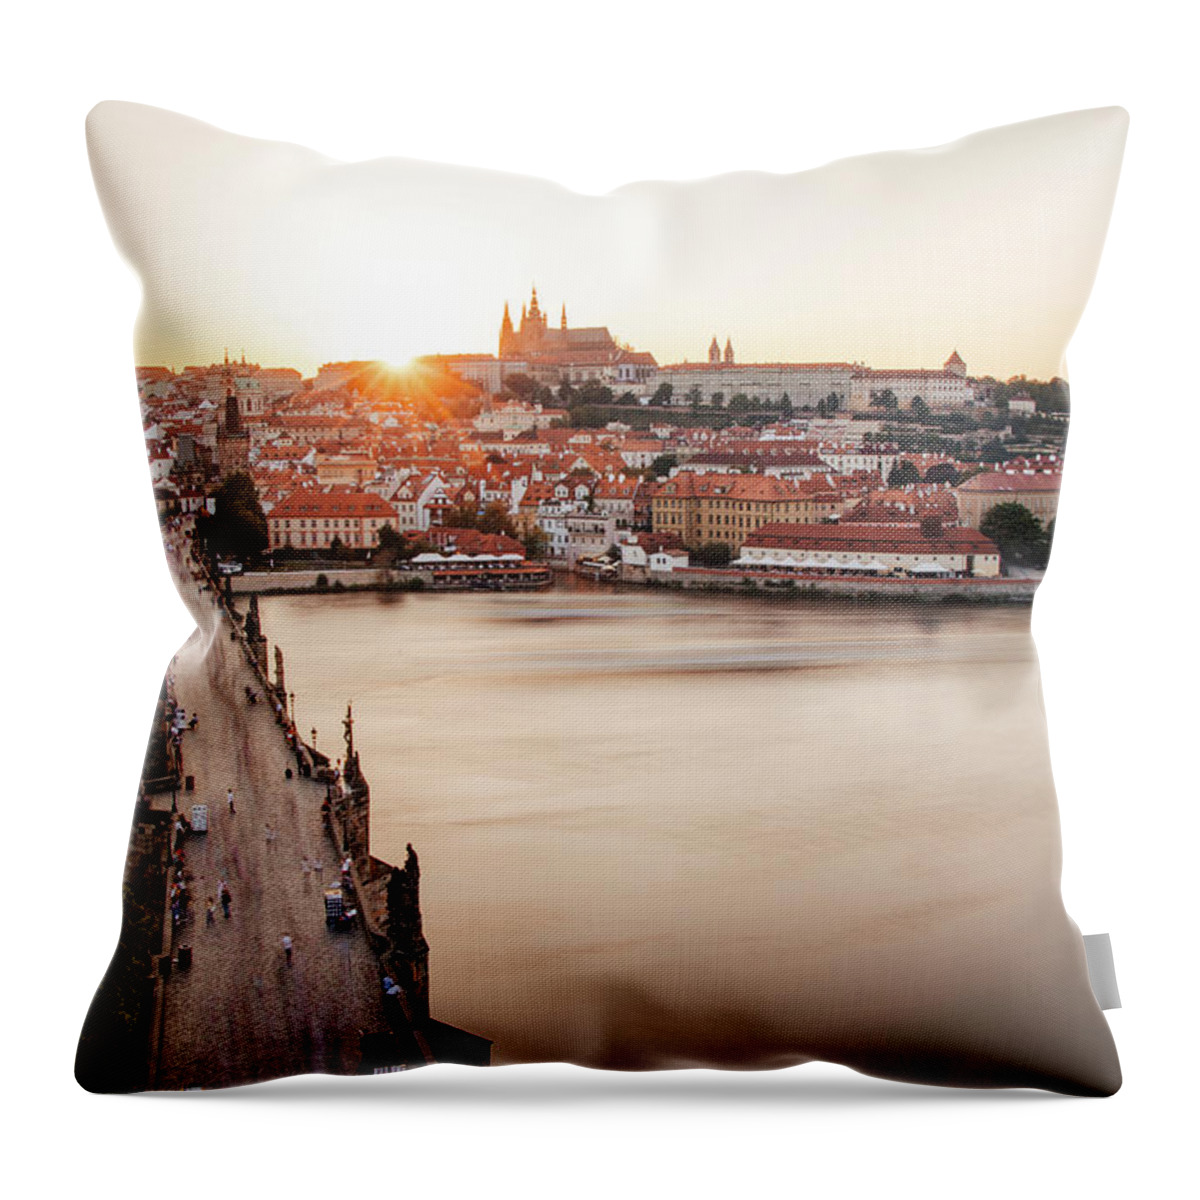 Castle Throw Pillow featuring the photograph Czech capital city with Charles bridge at sunset by Vaclav Sonnek